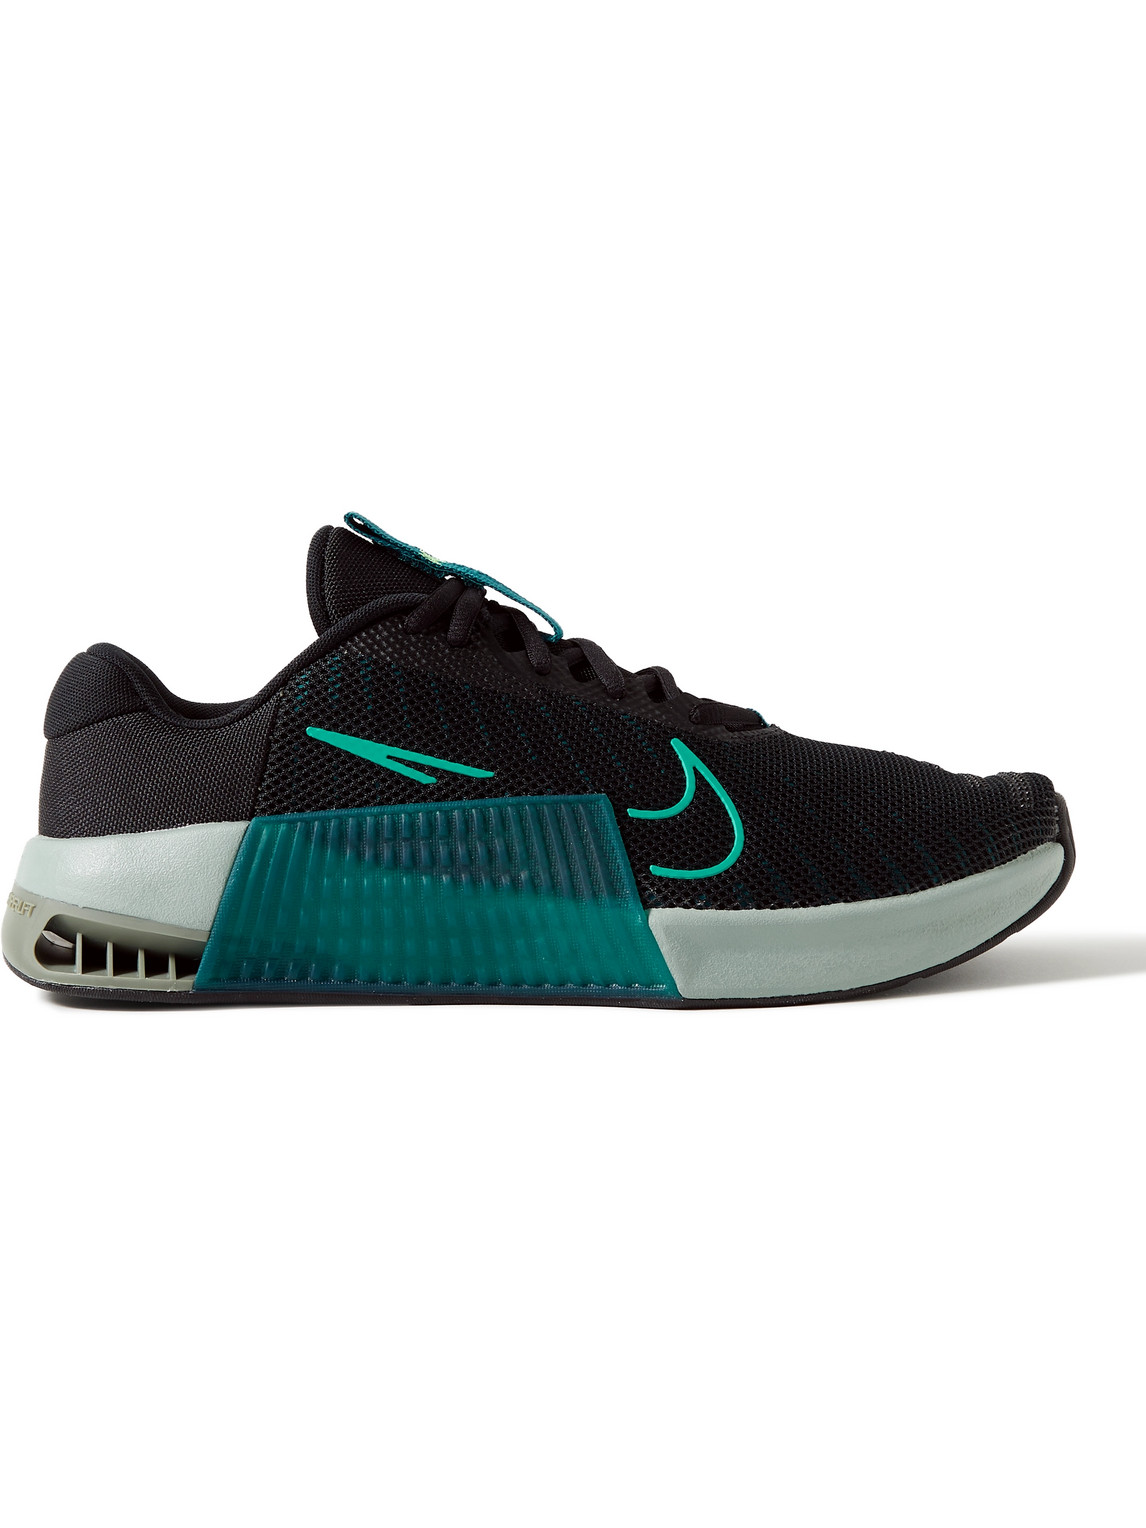 NIKE METCON 9 RUBBER-TRIMMED MESH SNEAKERS